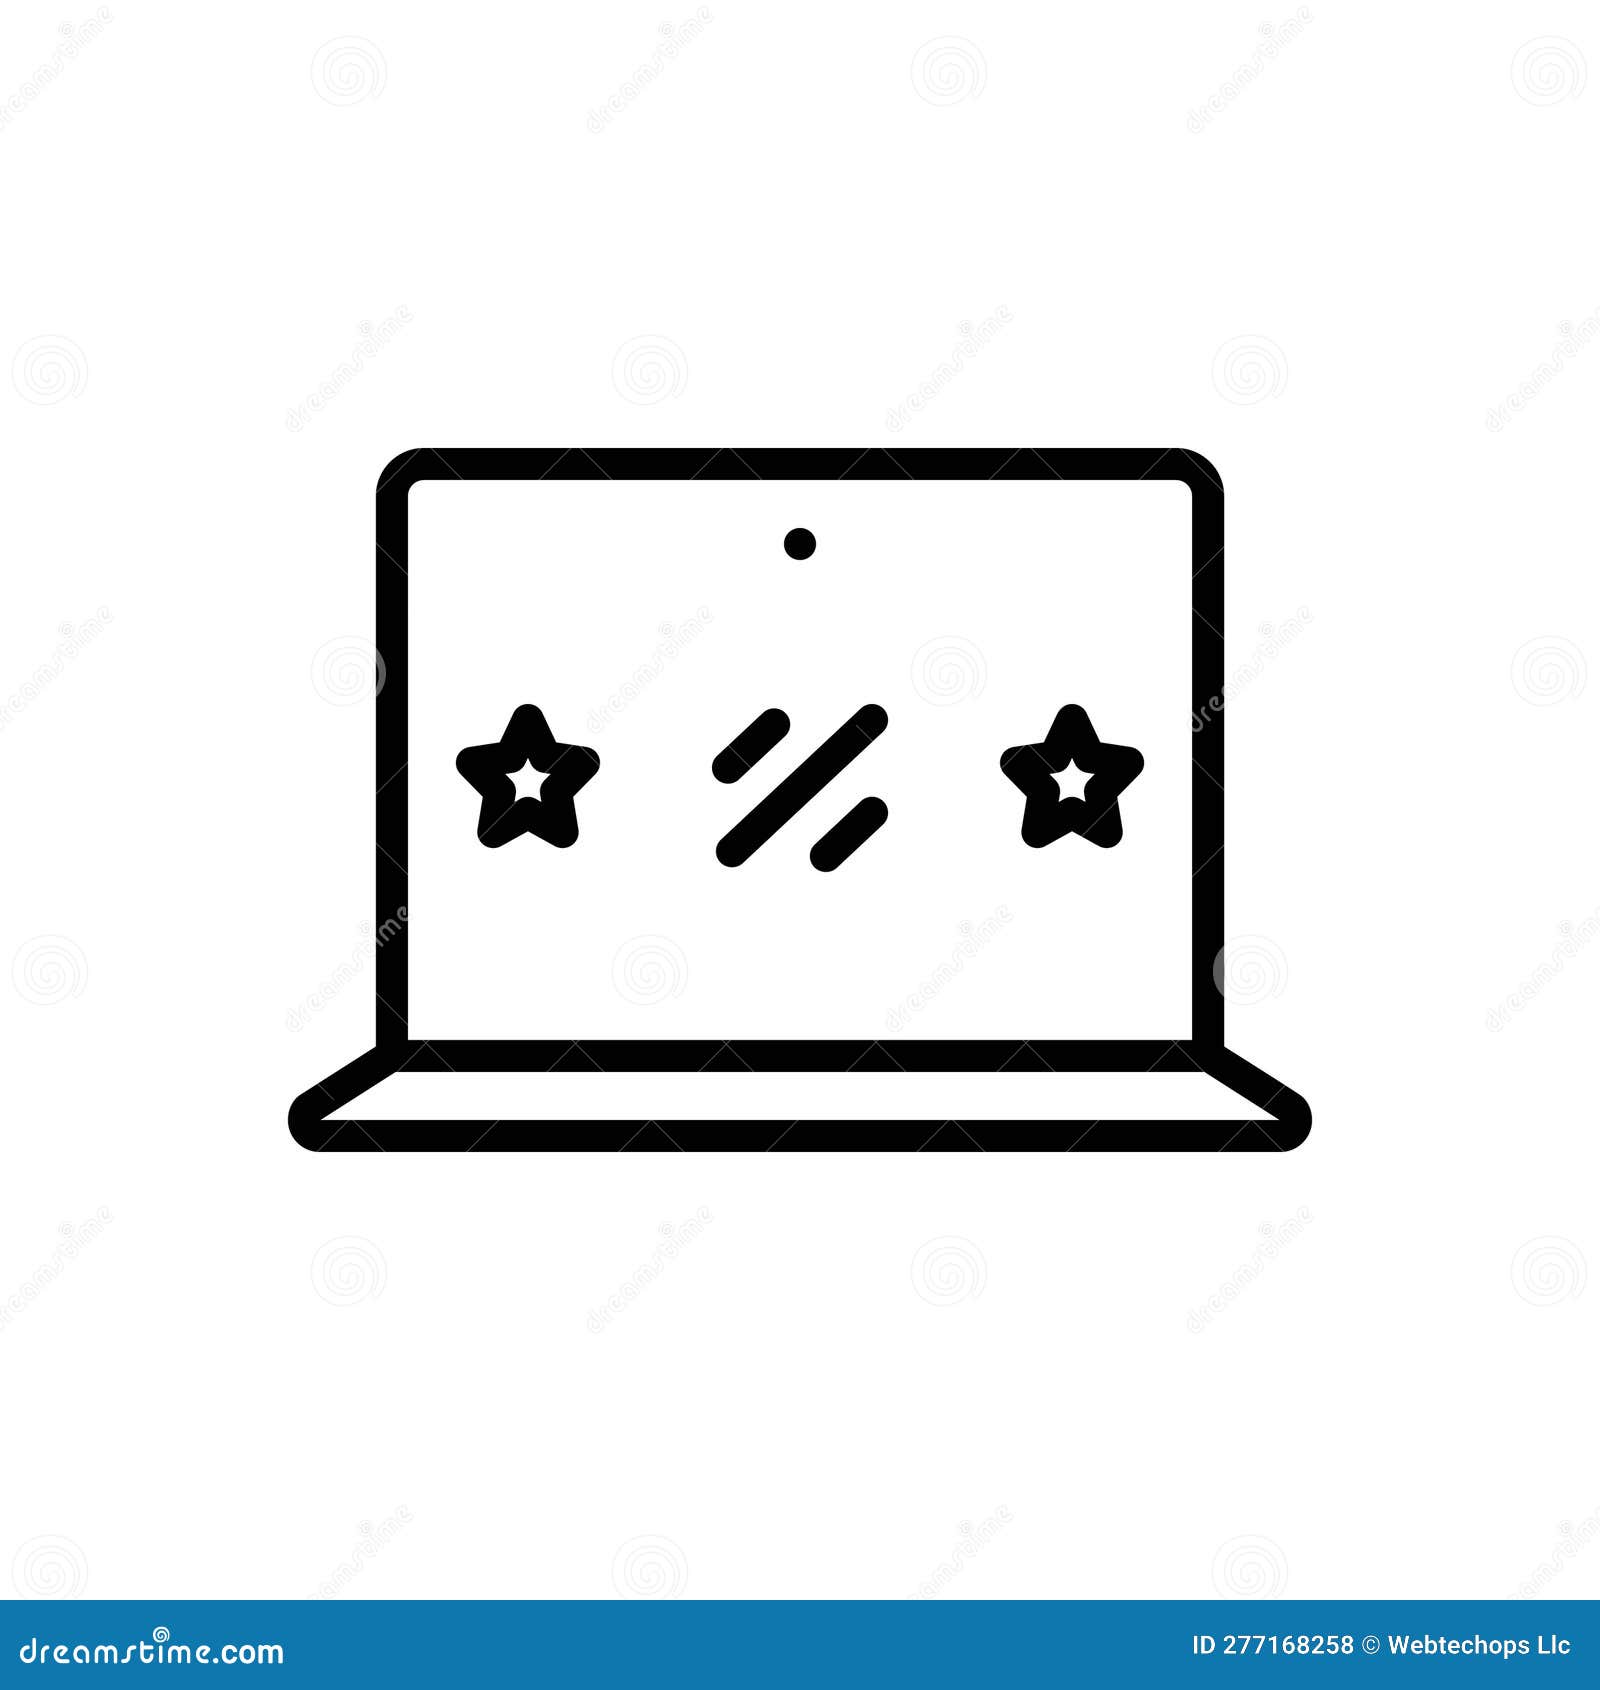 black line icon for laptop, microcomputer and display